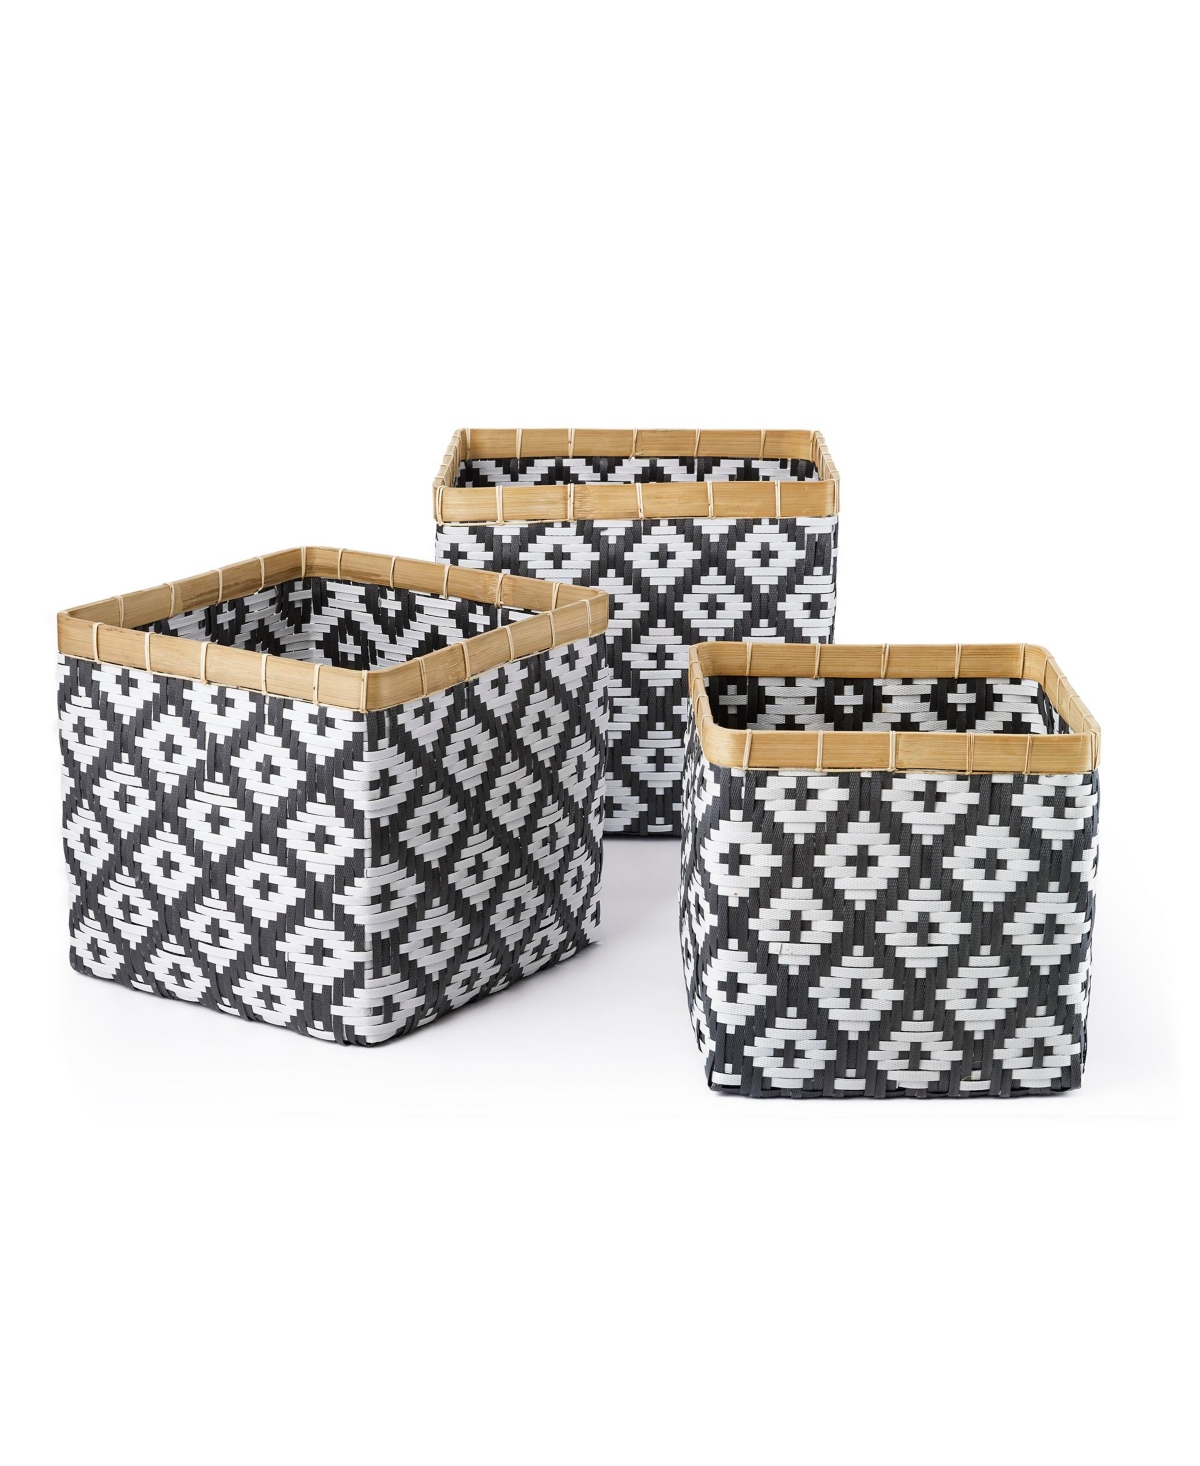 3 Piece Square Bamboo Basket Set with No Handles, Natural Rim - Black and White